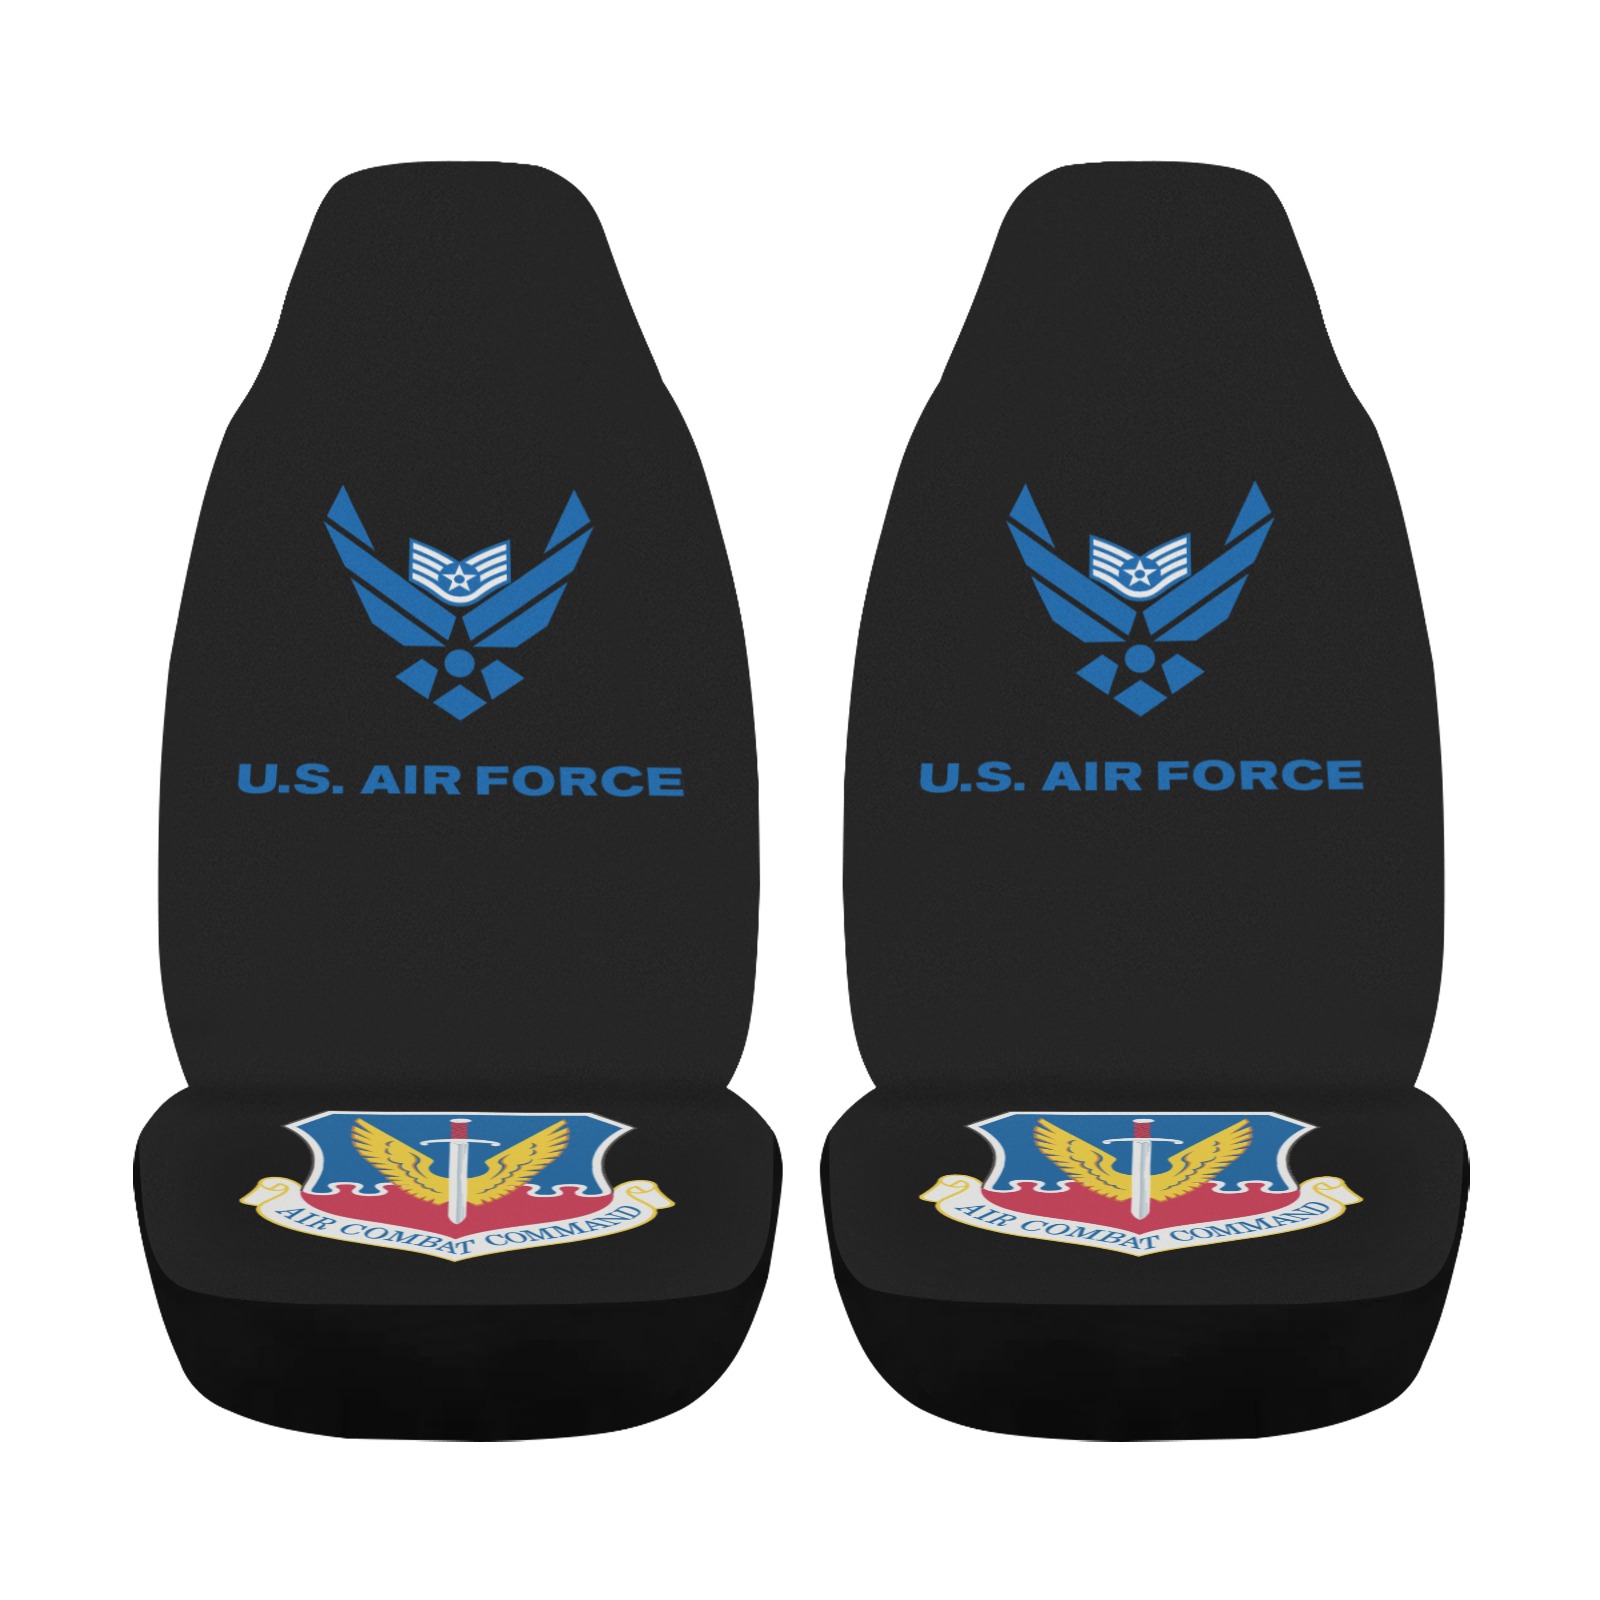 Staff Sargent Offutt Air Force Base Car Seat Cover Airbag Compatible (Set of 2)